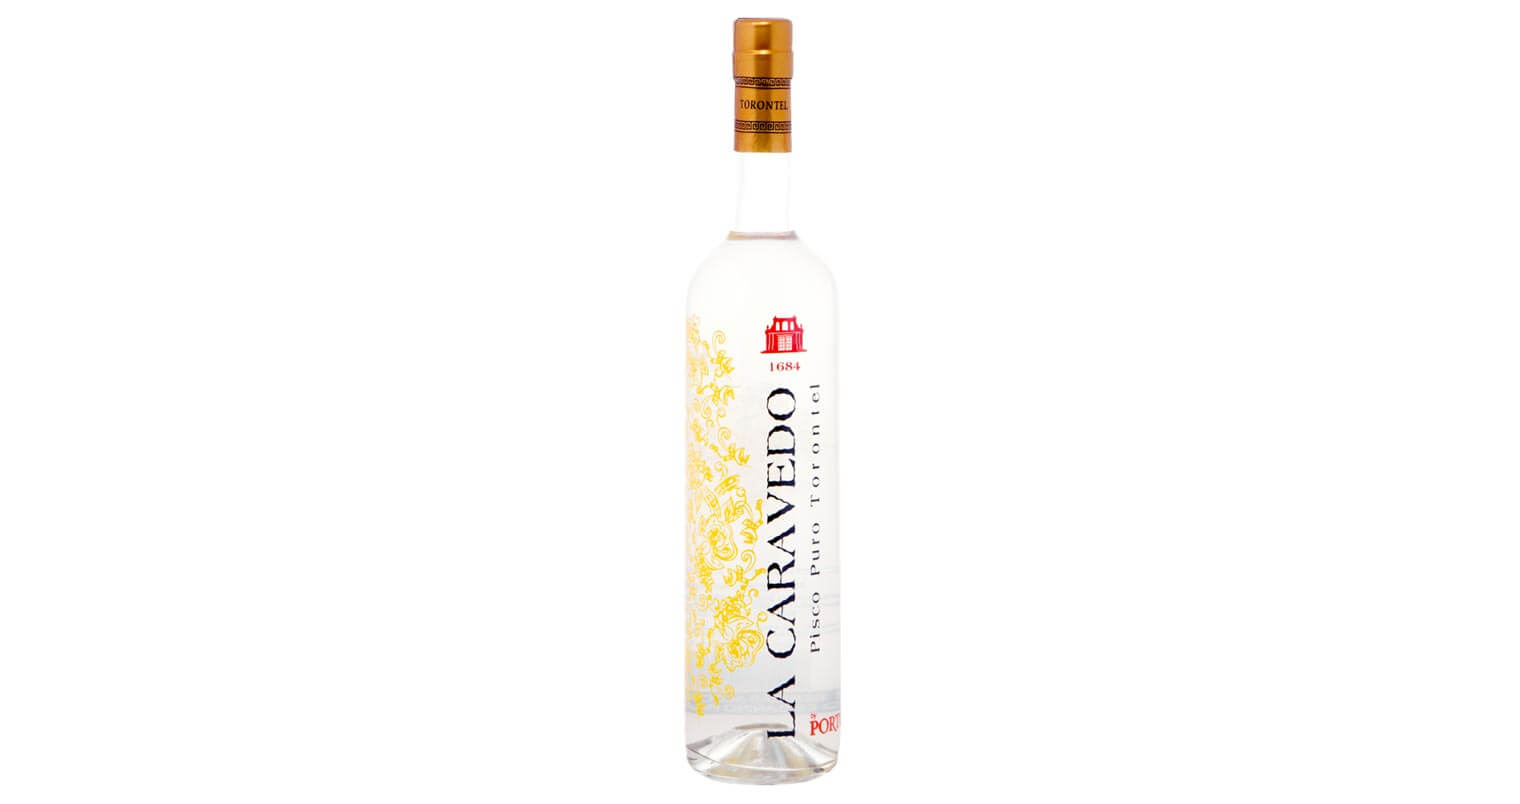 La Caravedo Pisco Puro Torontel Wins Double Gold and Best in Show, featured image